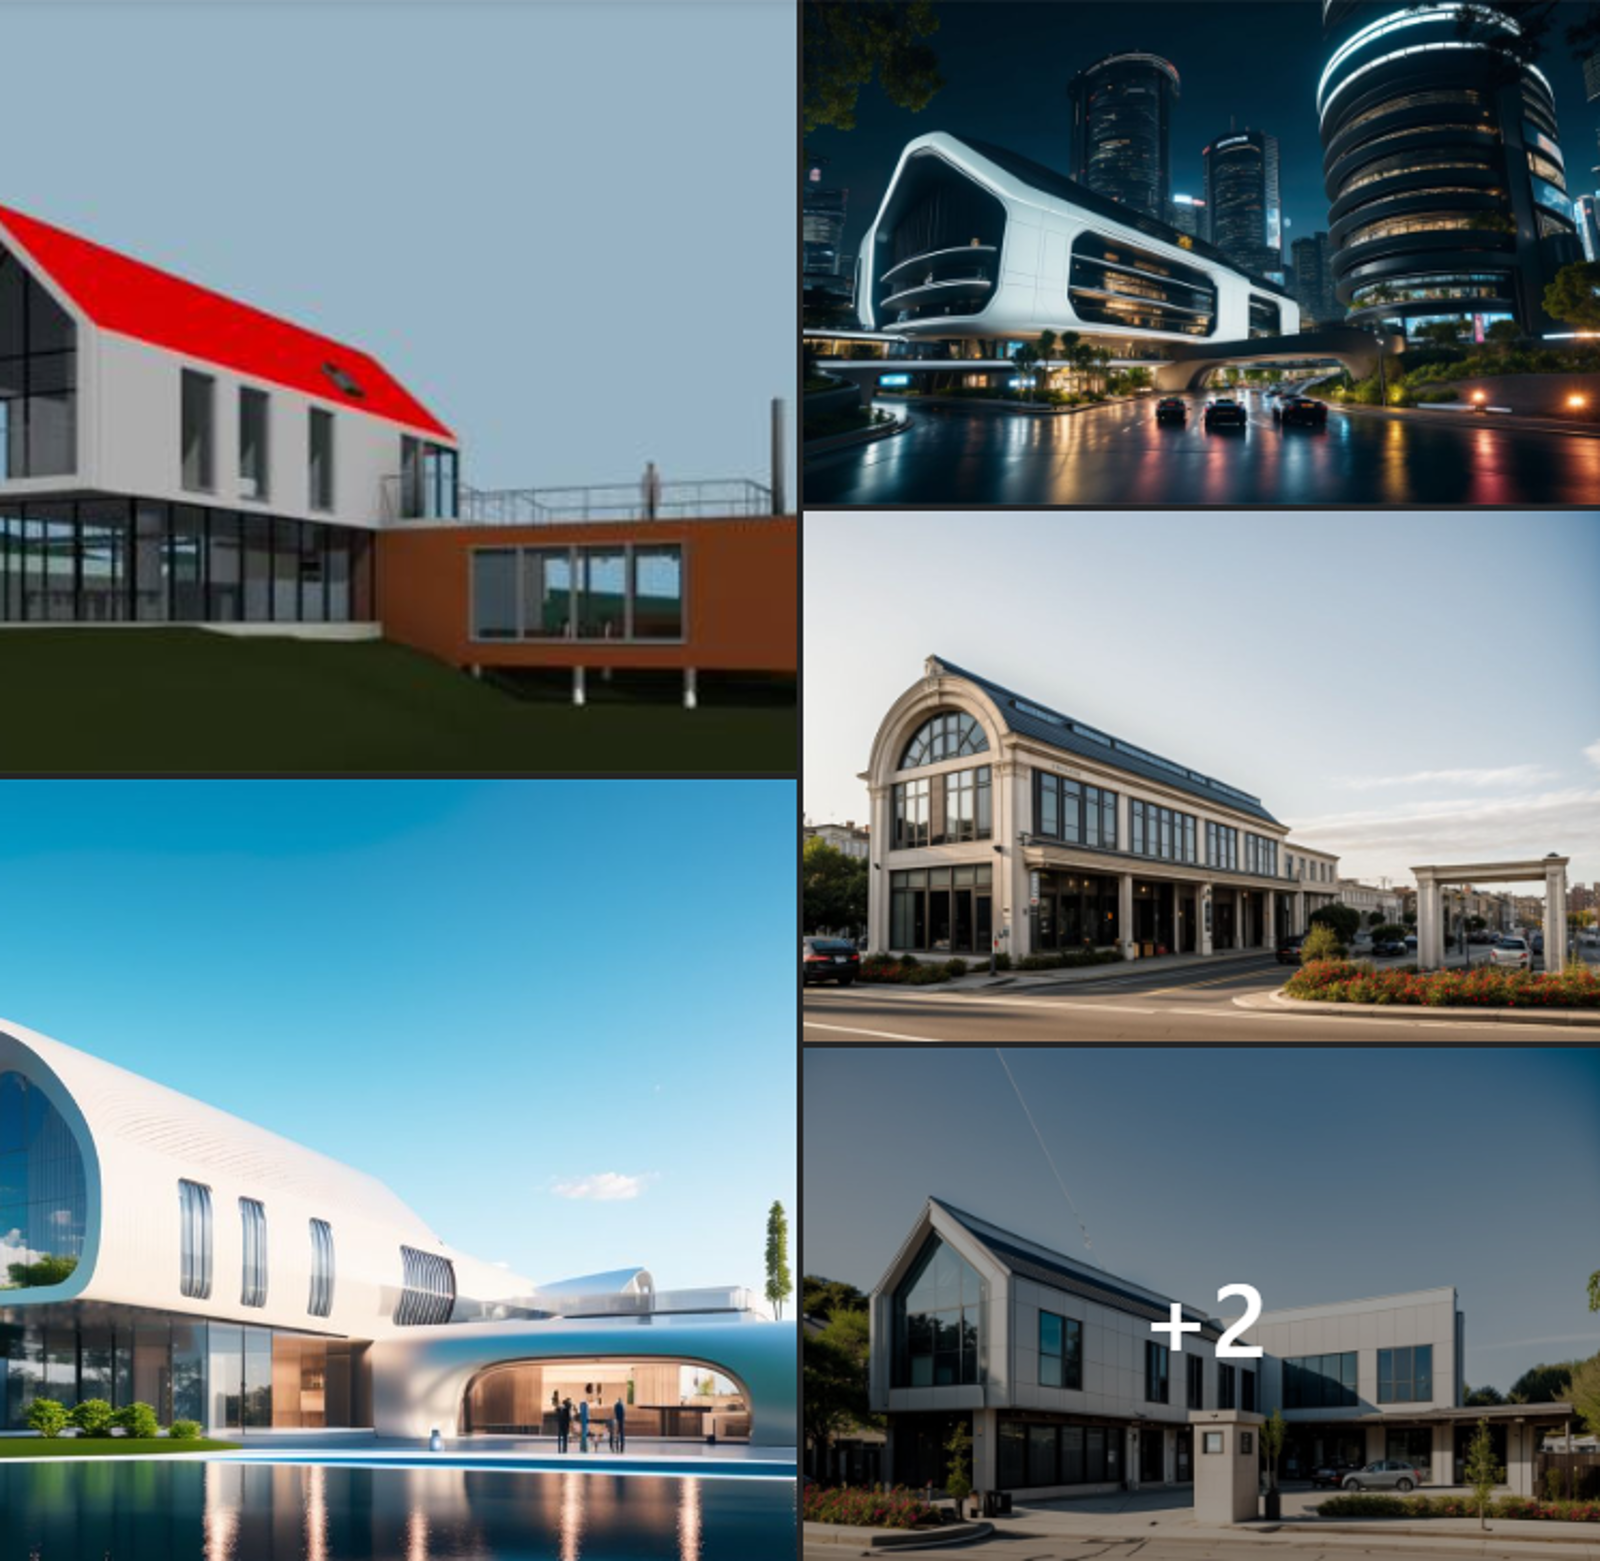 From <3d model> to < AI building styles>